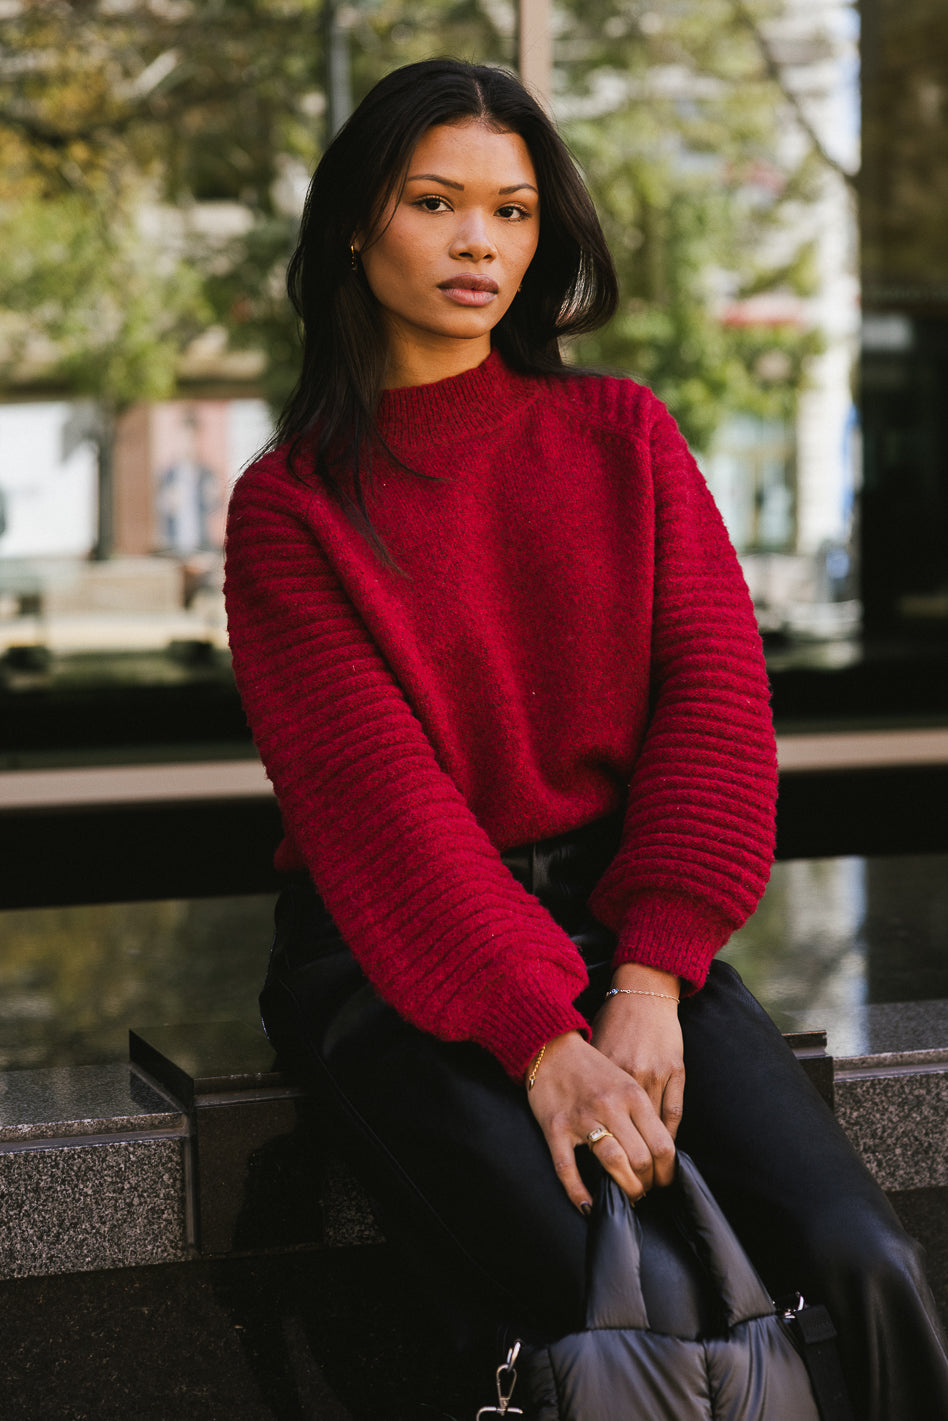 How to Wear a Red Sweater The Right Way